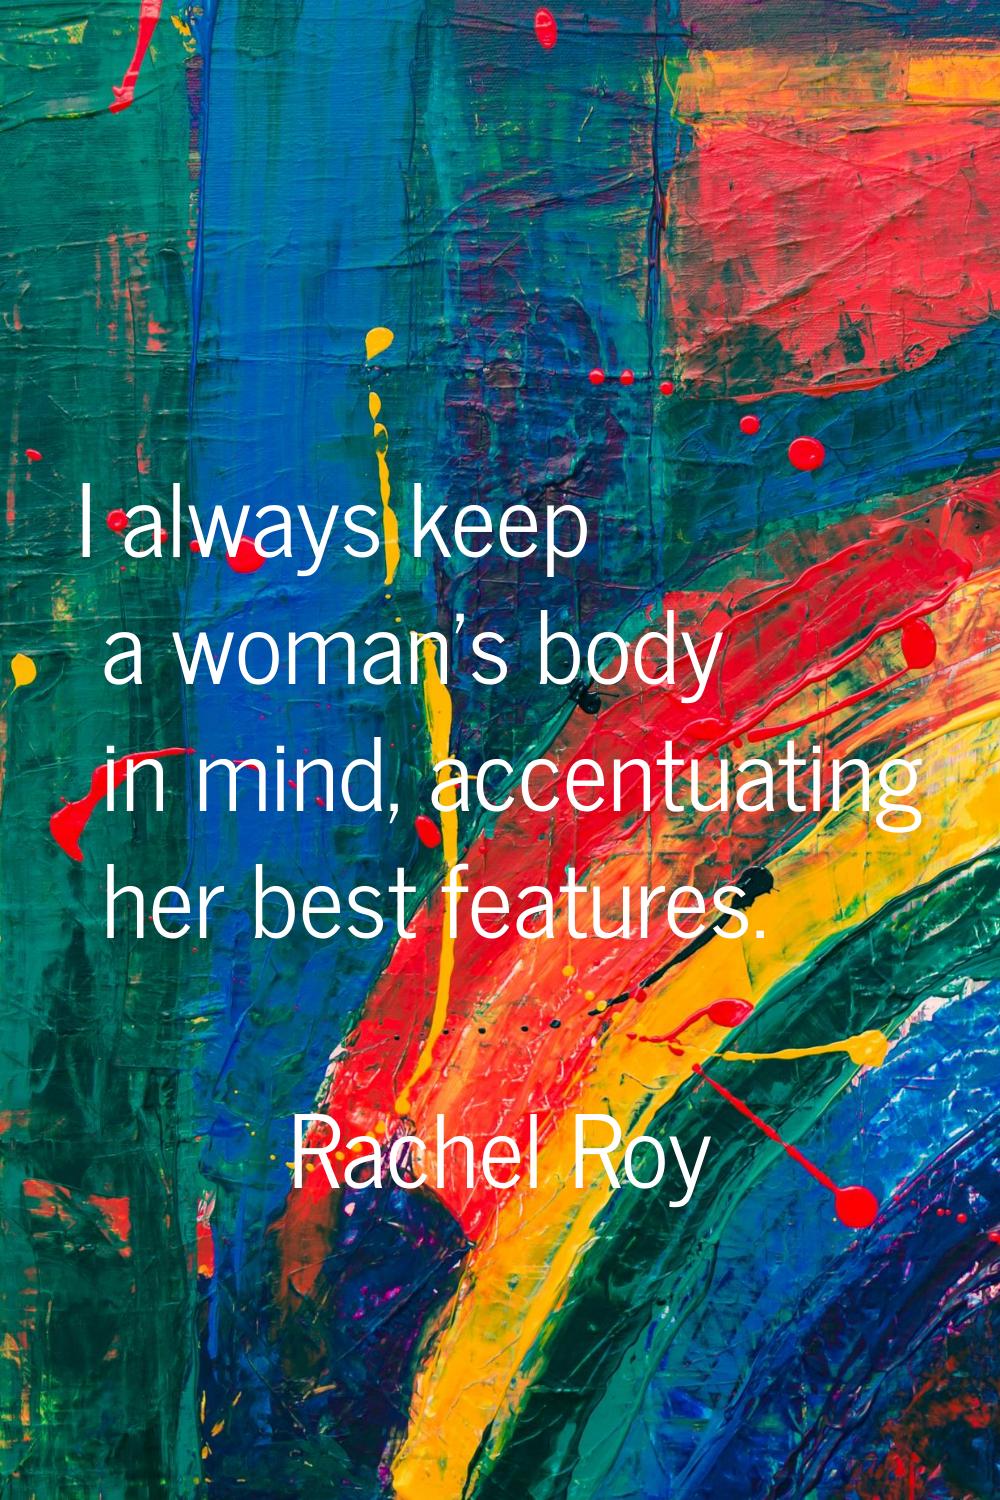 I always keep a woman's body in mind, accentuating her best features.